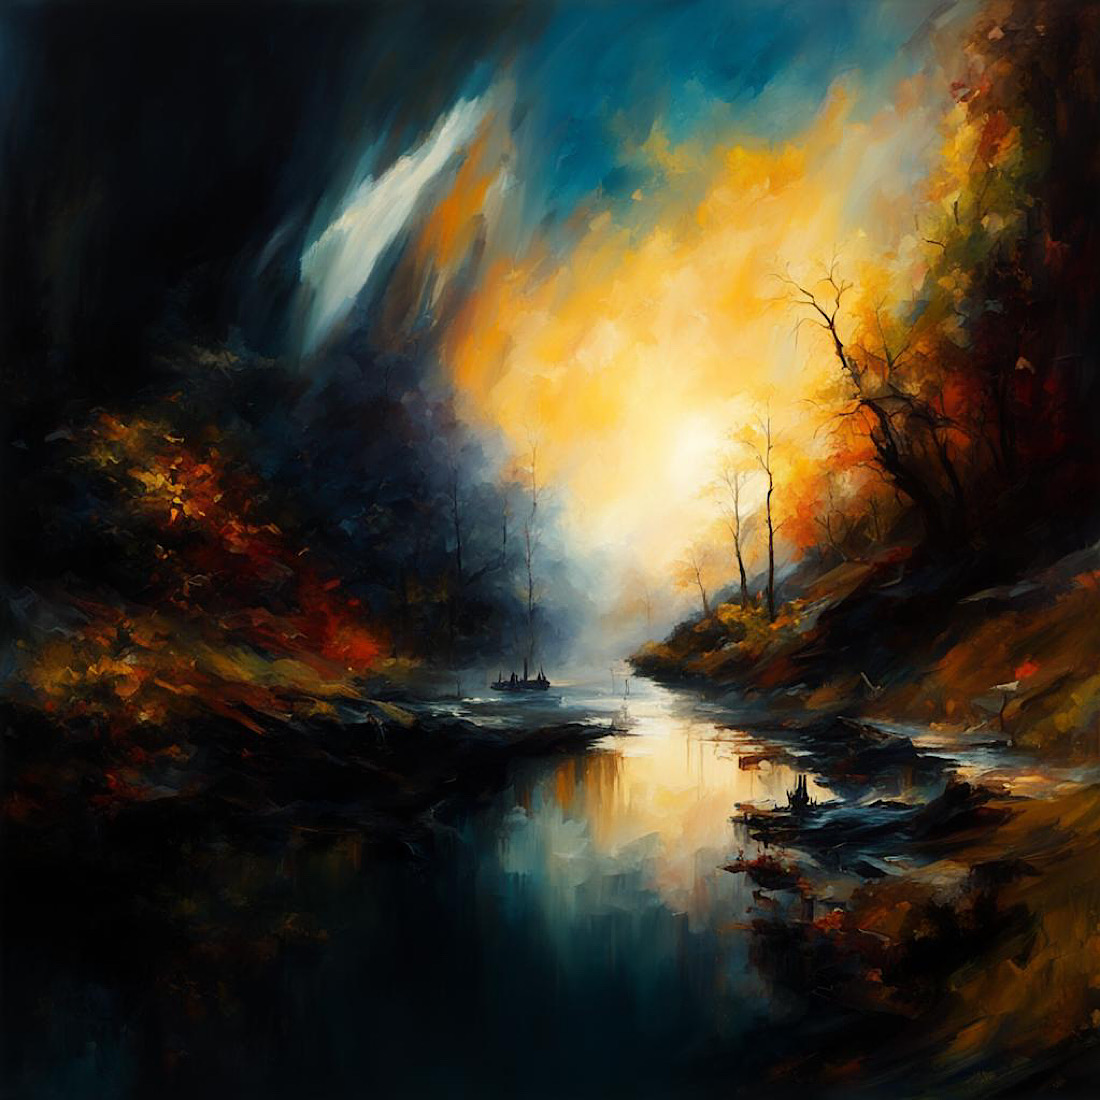 Oil painting "Landscape" cover image.